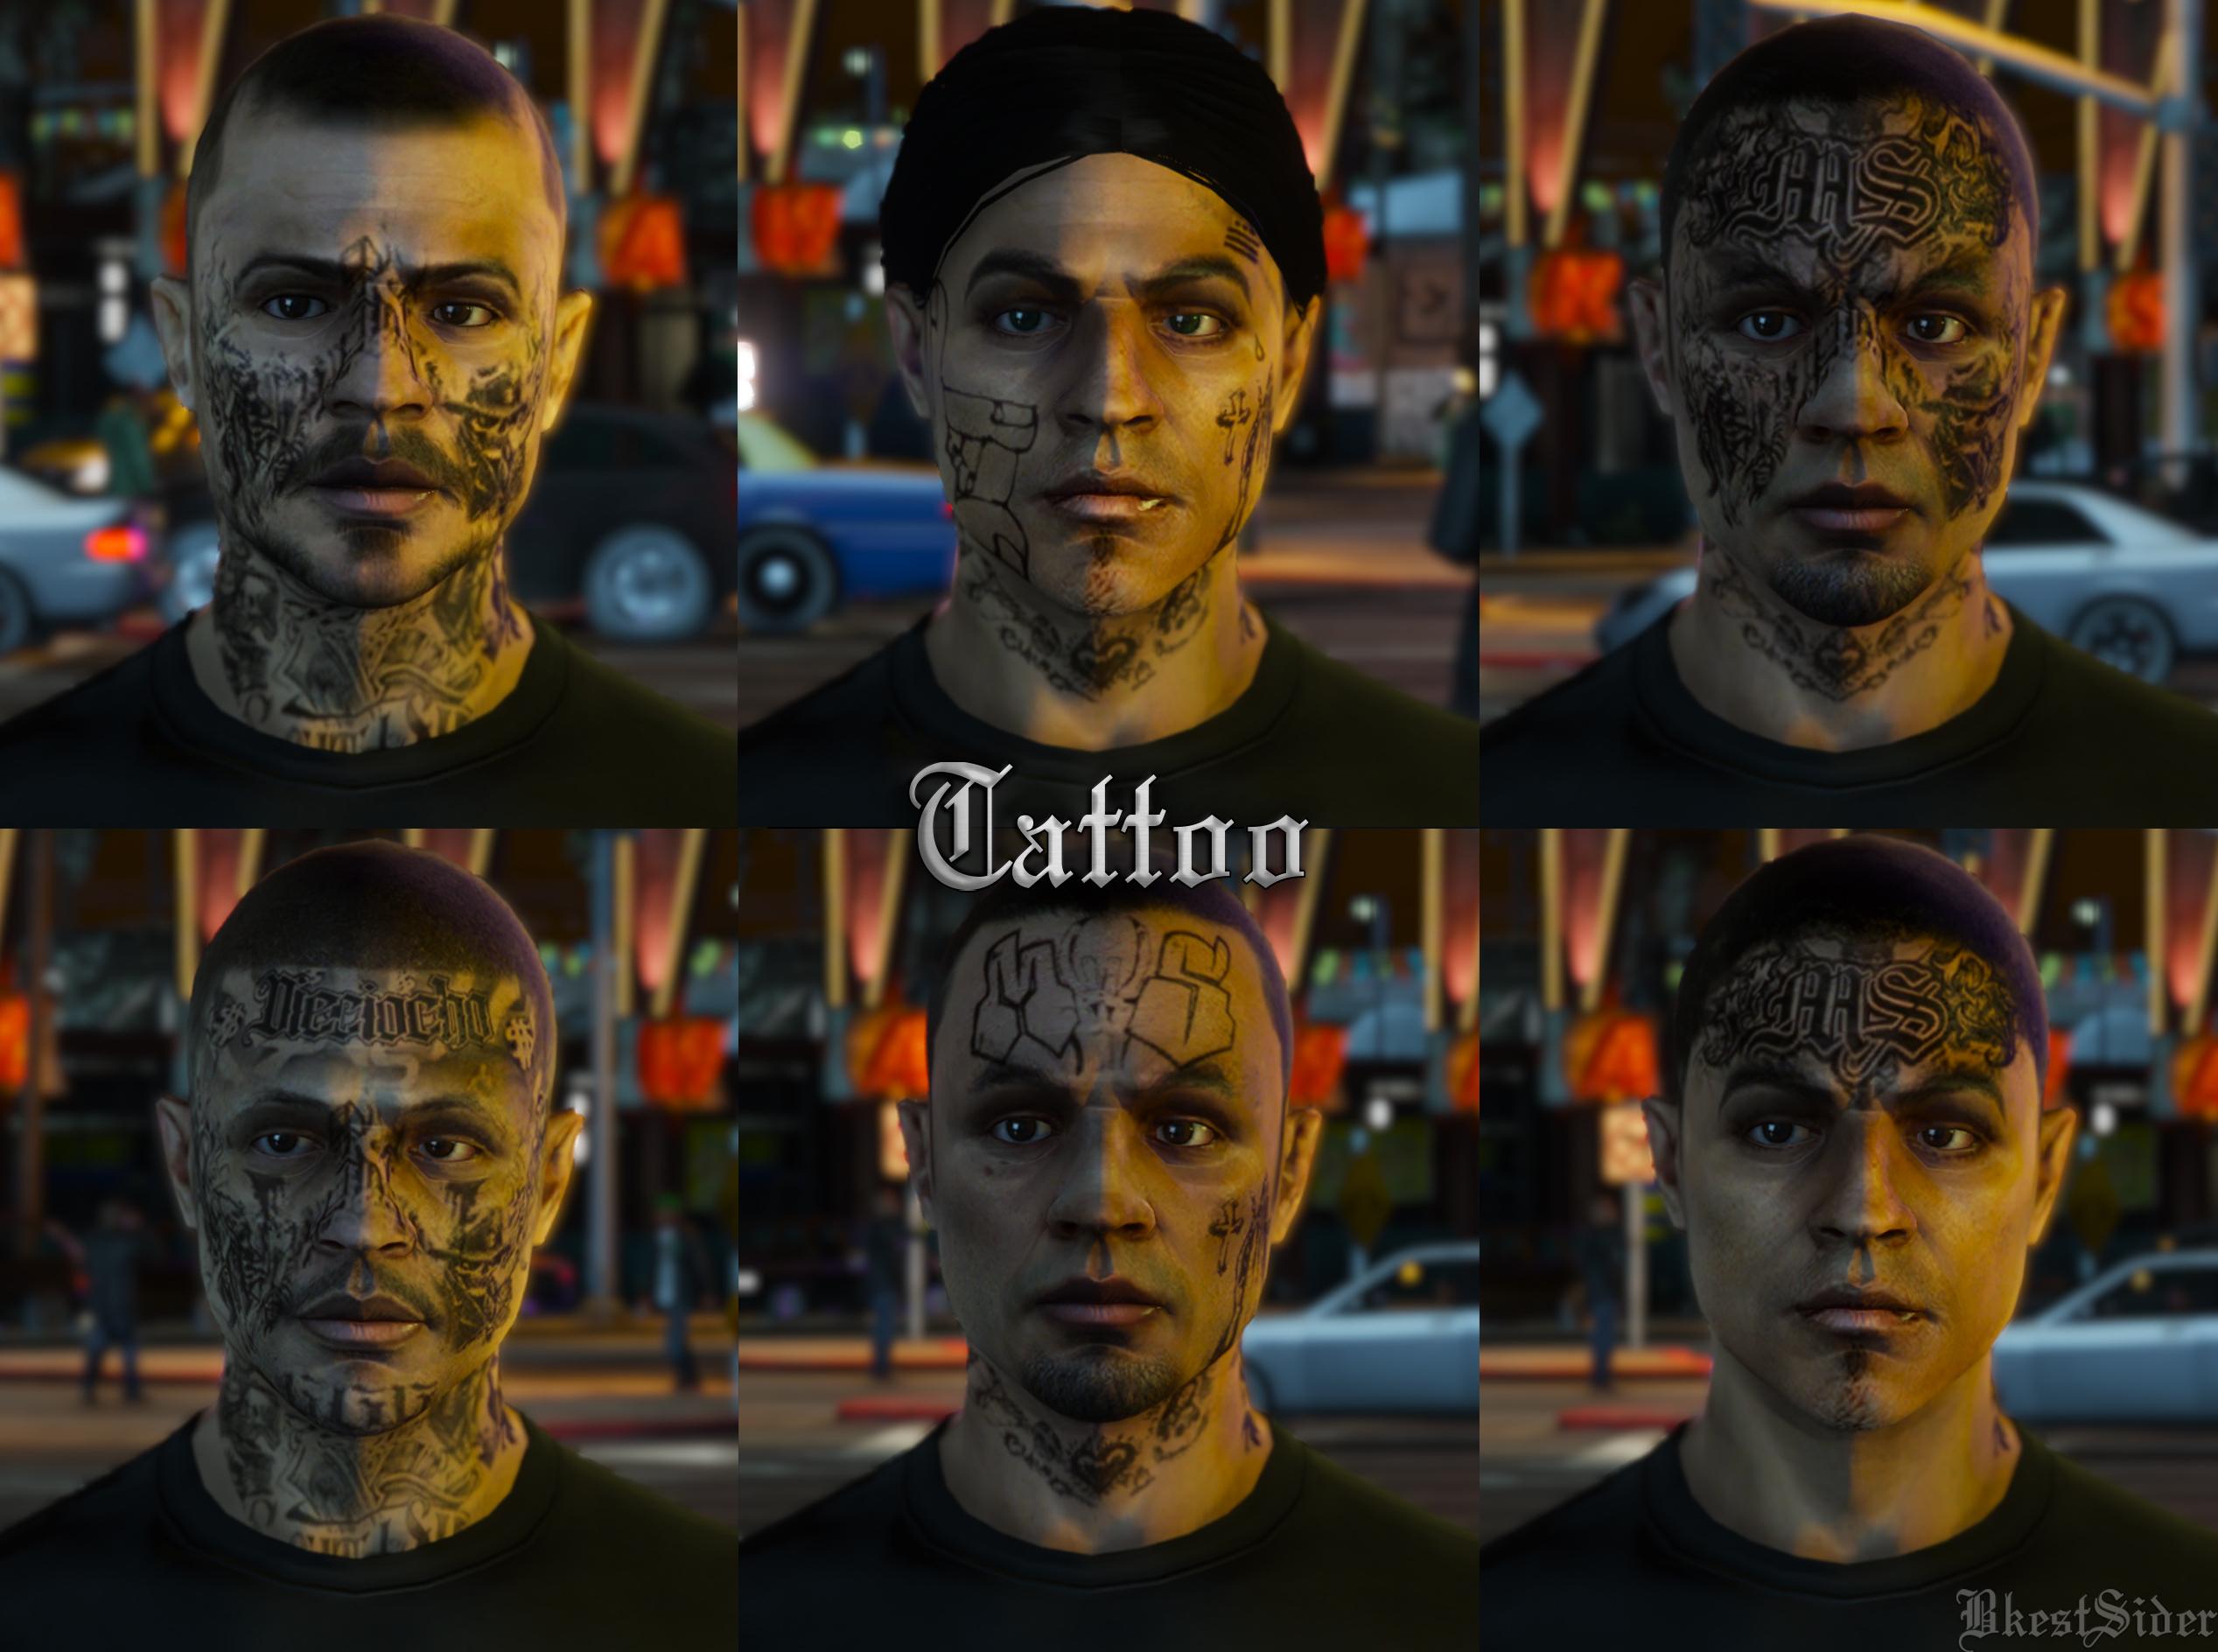 Gang Tattoos When Family Is A Deathly Value  Tattoodo